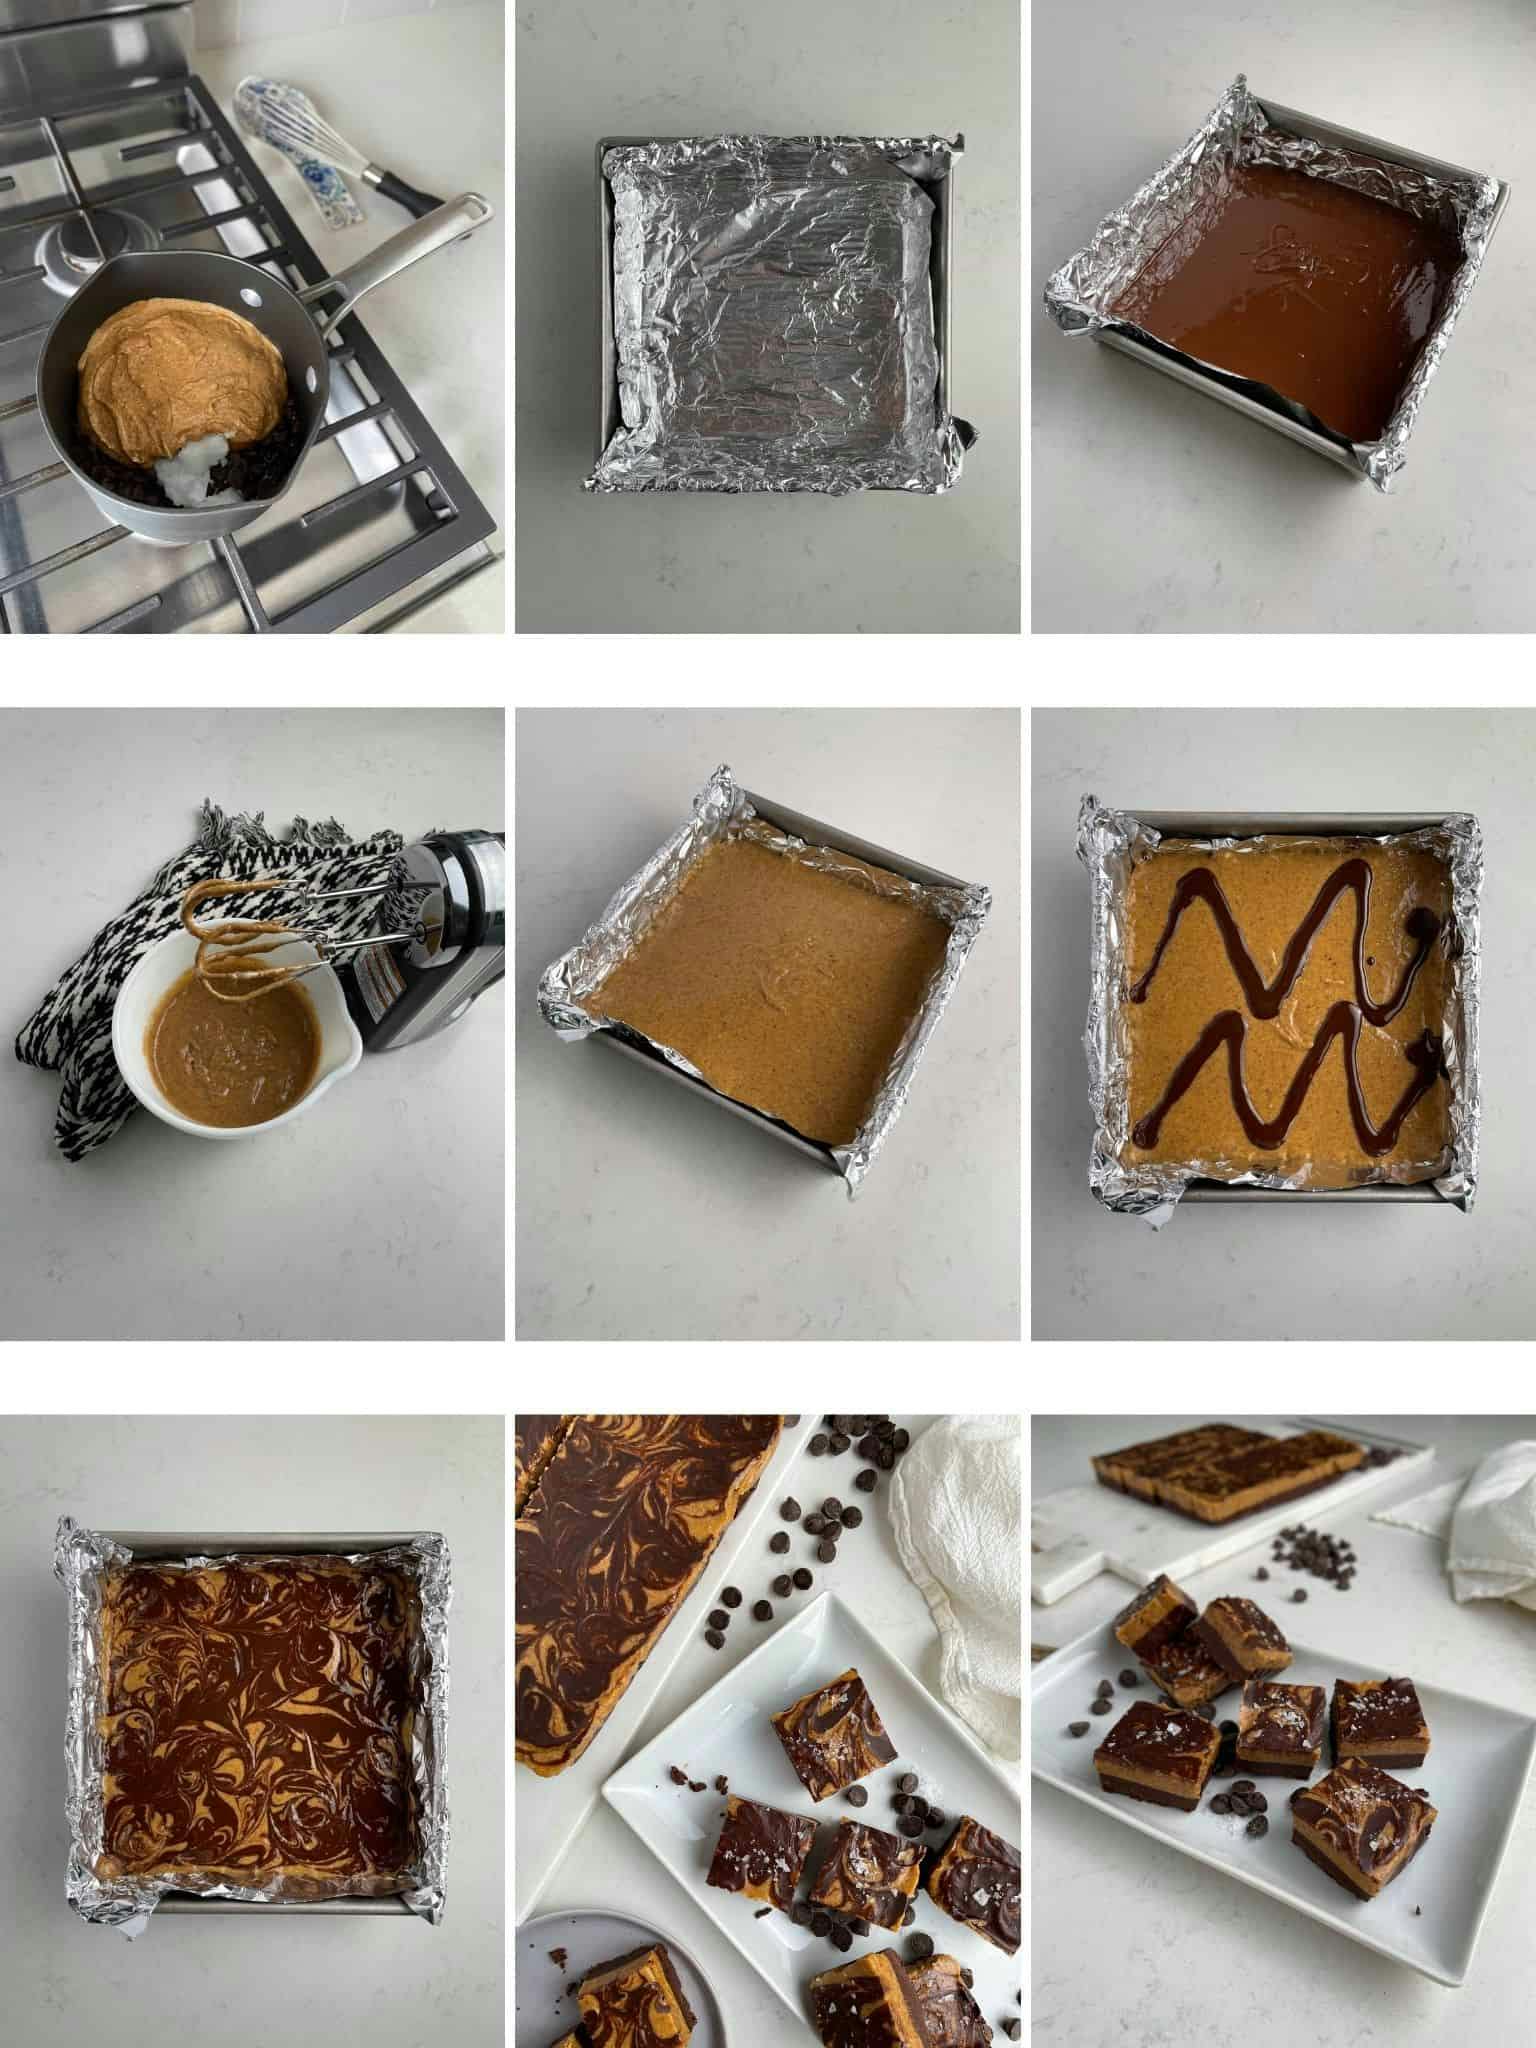 Step by step process of how to make almond butter fudge.